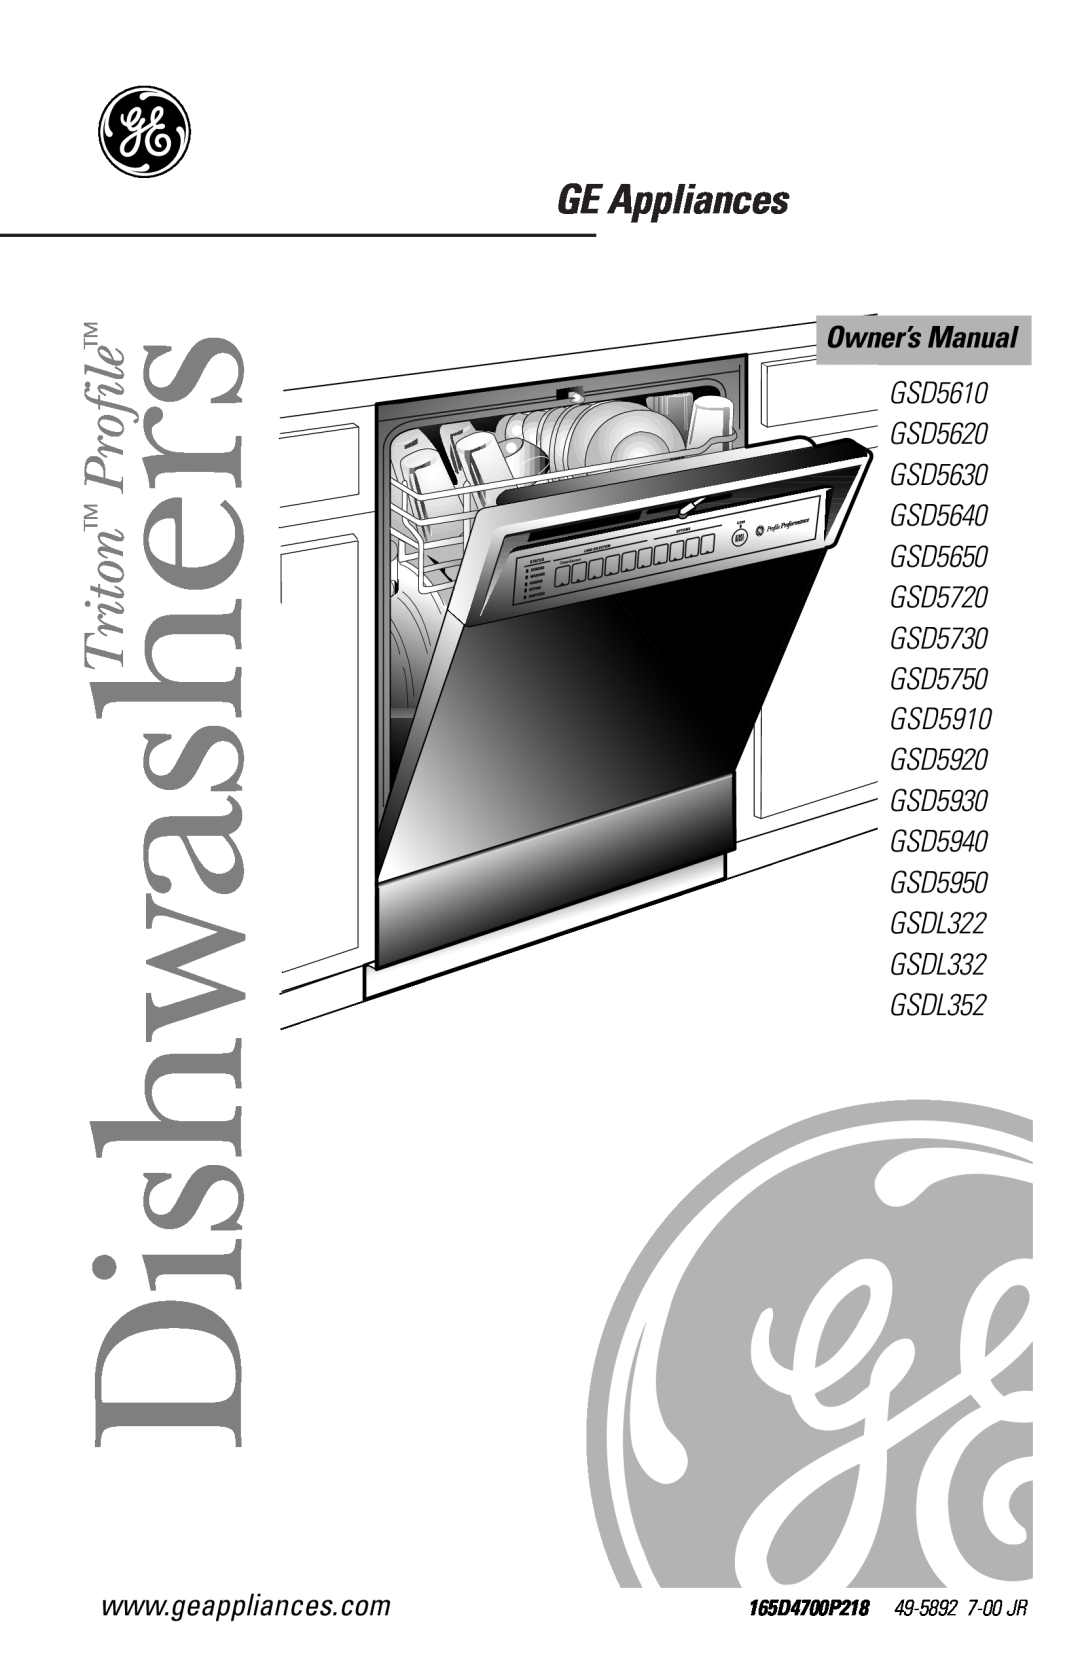 GE GSDL322, GSDL352, GSDL332, GSD5920, GSD5910, GSD5950 owner manual GE Appliances, Owner’s Manual, DishwashersTriton Profile 